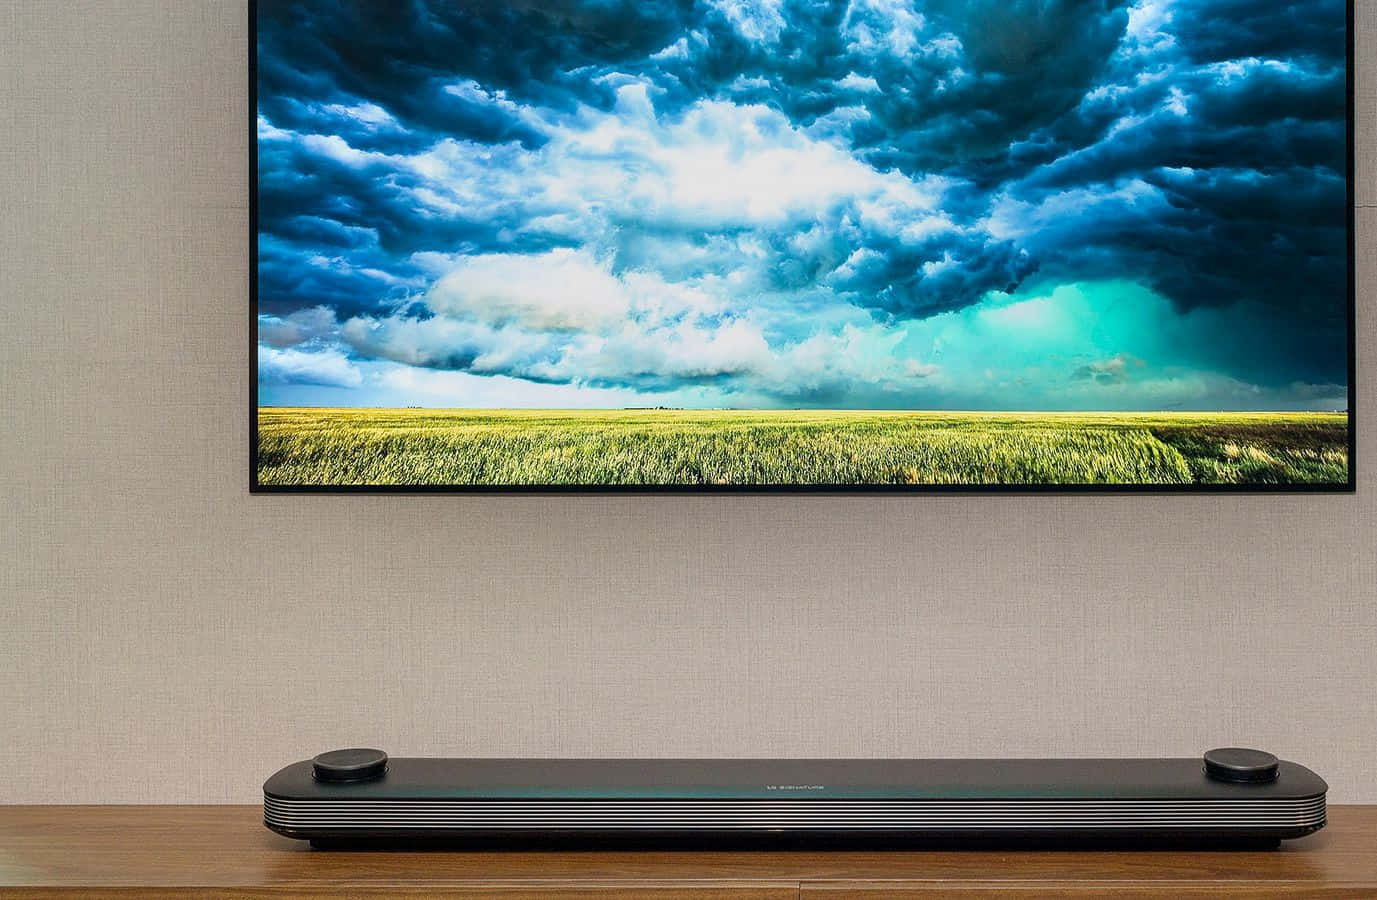 Enjoy a cinematic experience with the latest high-resolution TVs